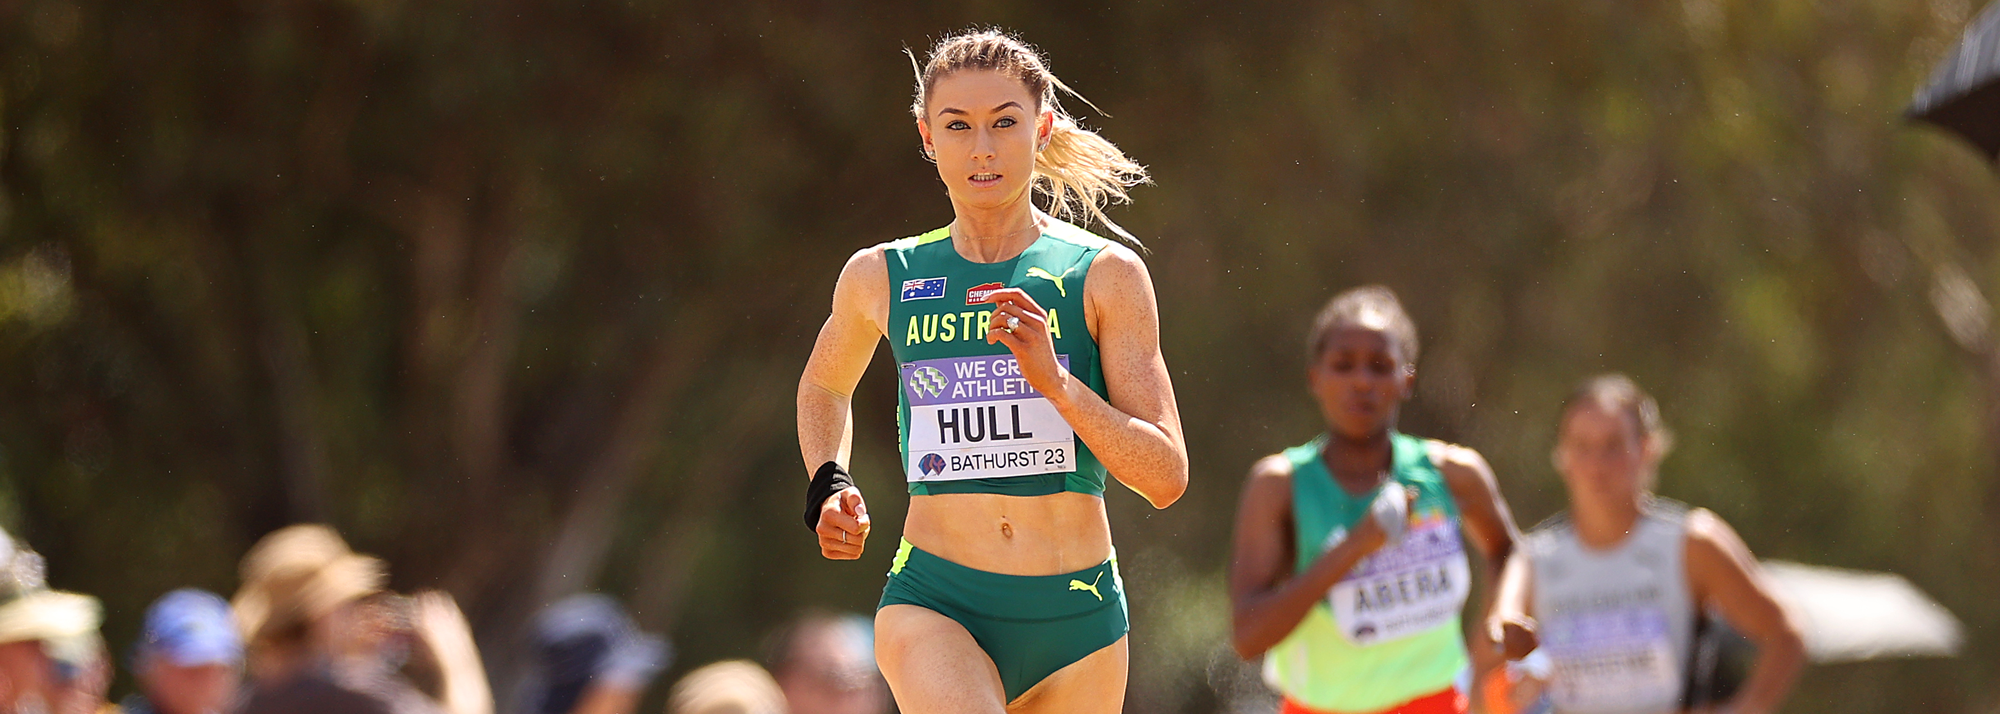 It took a 2km ”hot lap” at Bathurst for perennial 1500m finalist Jessica Hull to finally win a medal at a major championships when she was part of the Australian relay team that won bronze at the World Cross Country titles.